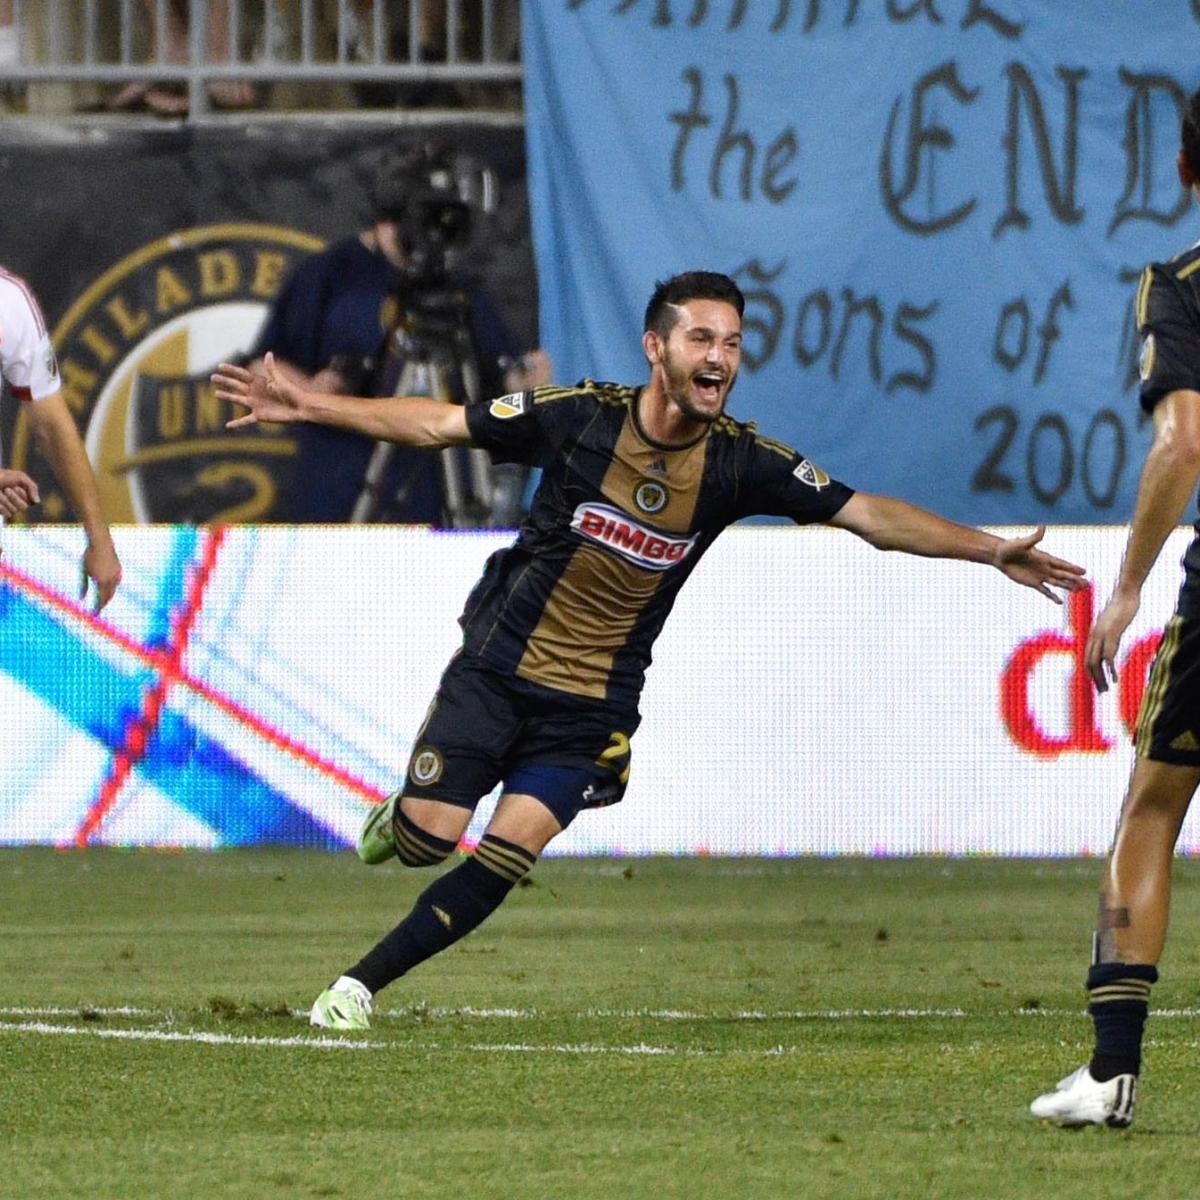 Joe Tansey on X: The Philadelphia Union have changed their badge